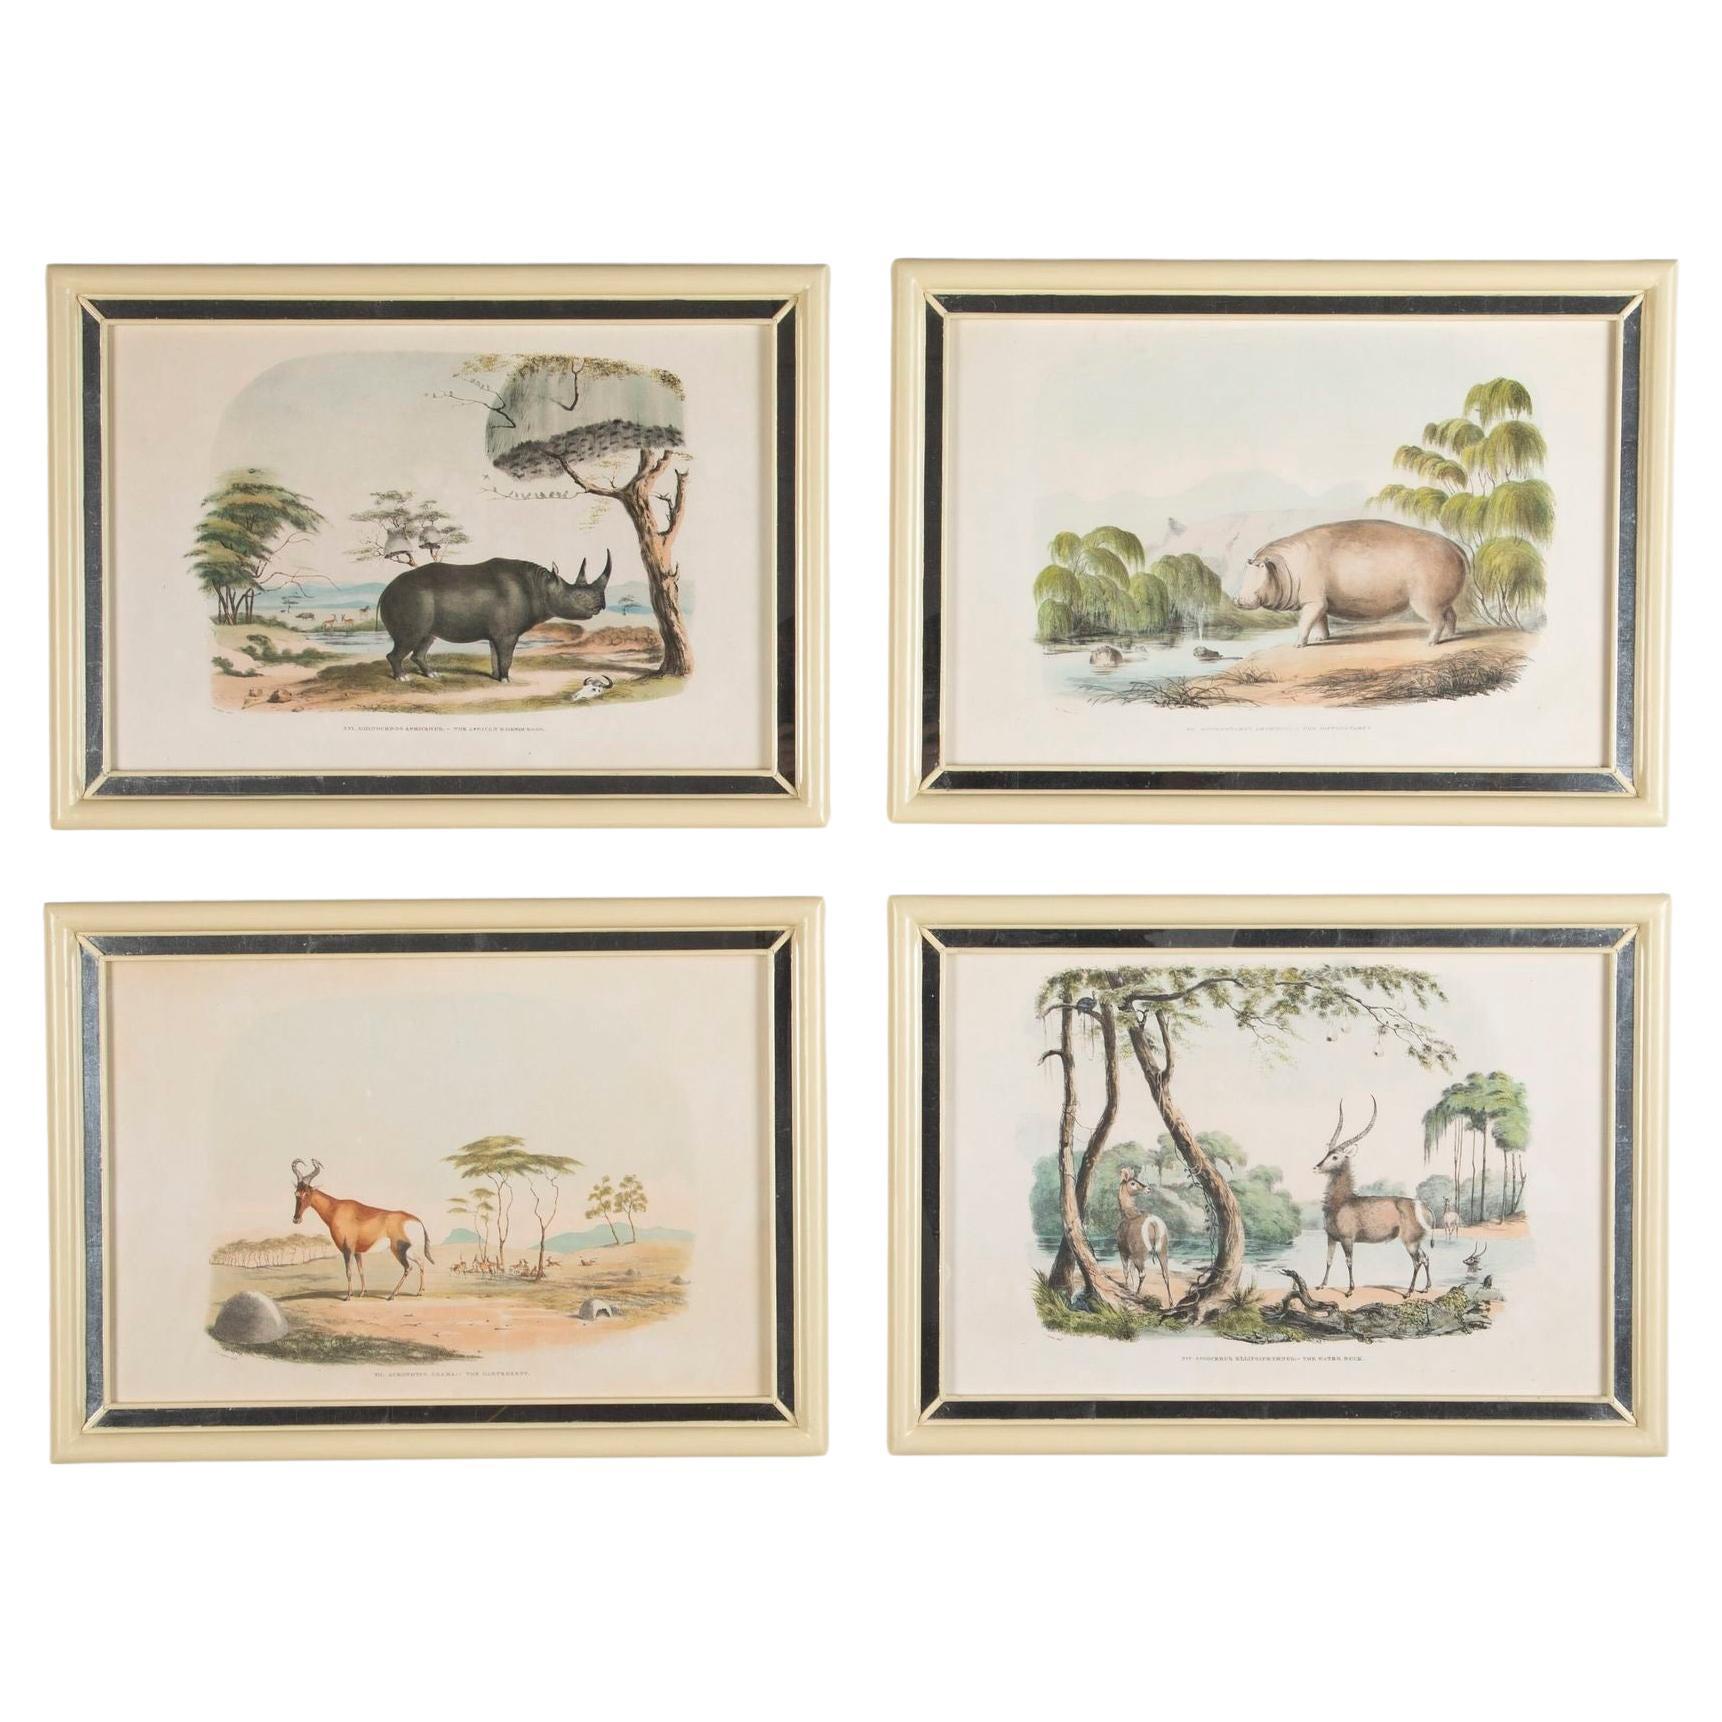 19th Century African Wildlife Lithographs